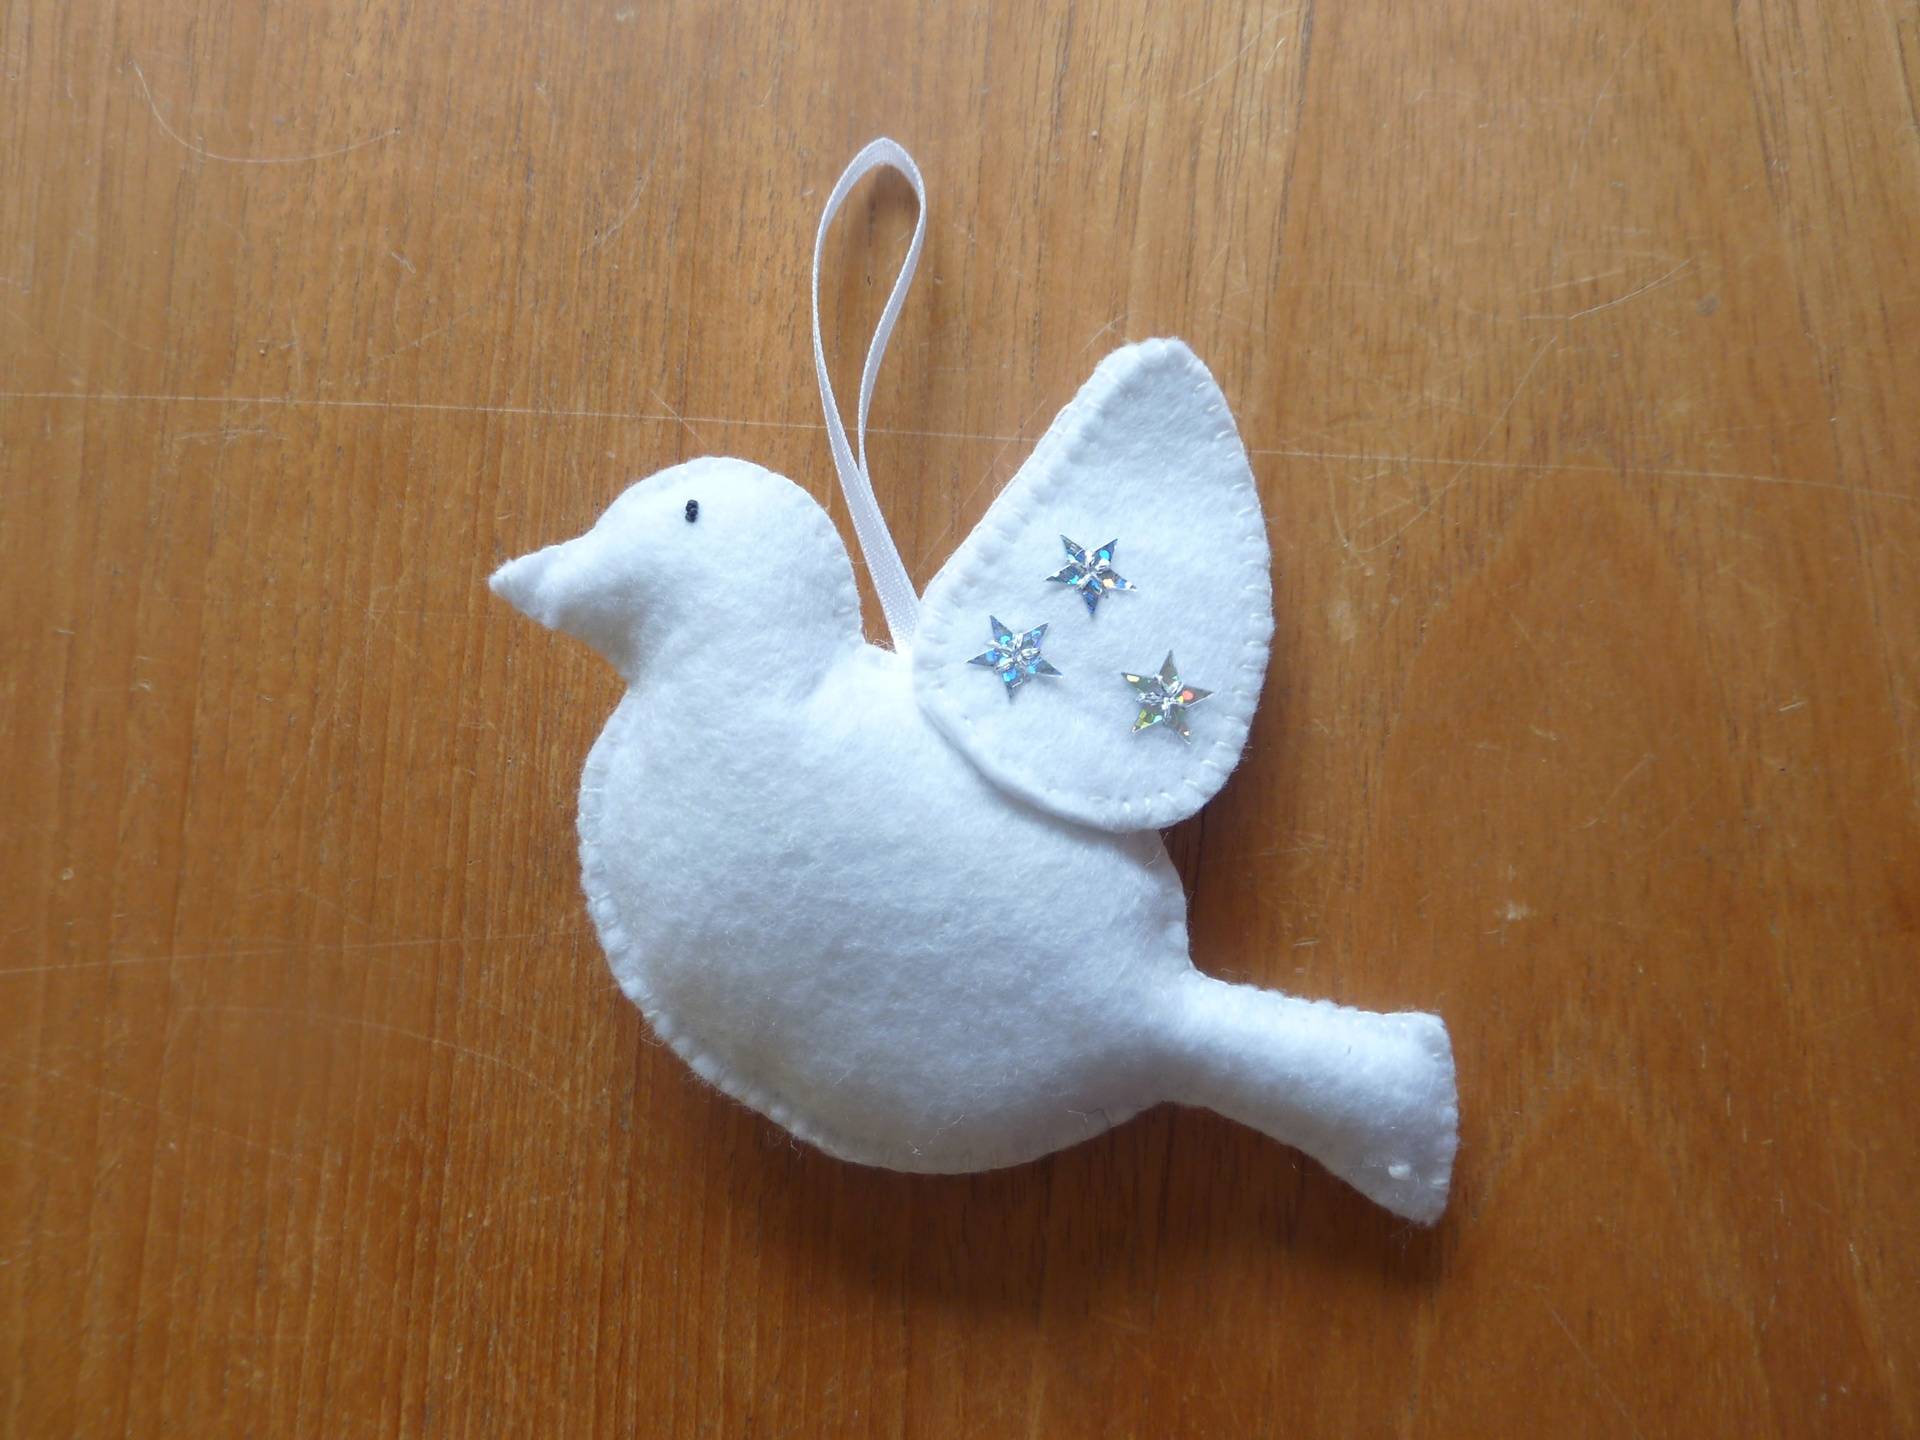 HAND-MADE FELT CHRISTMAS DECORATIONS Made to order - £2.50 each